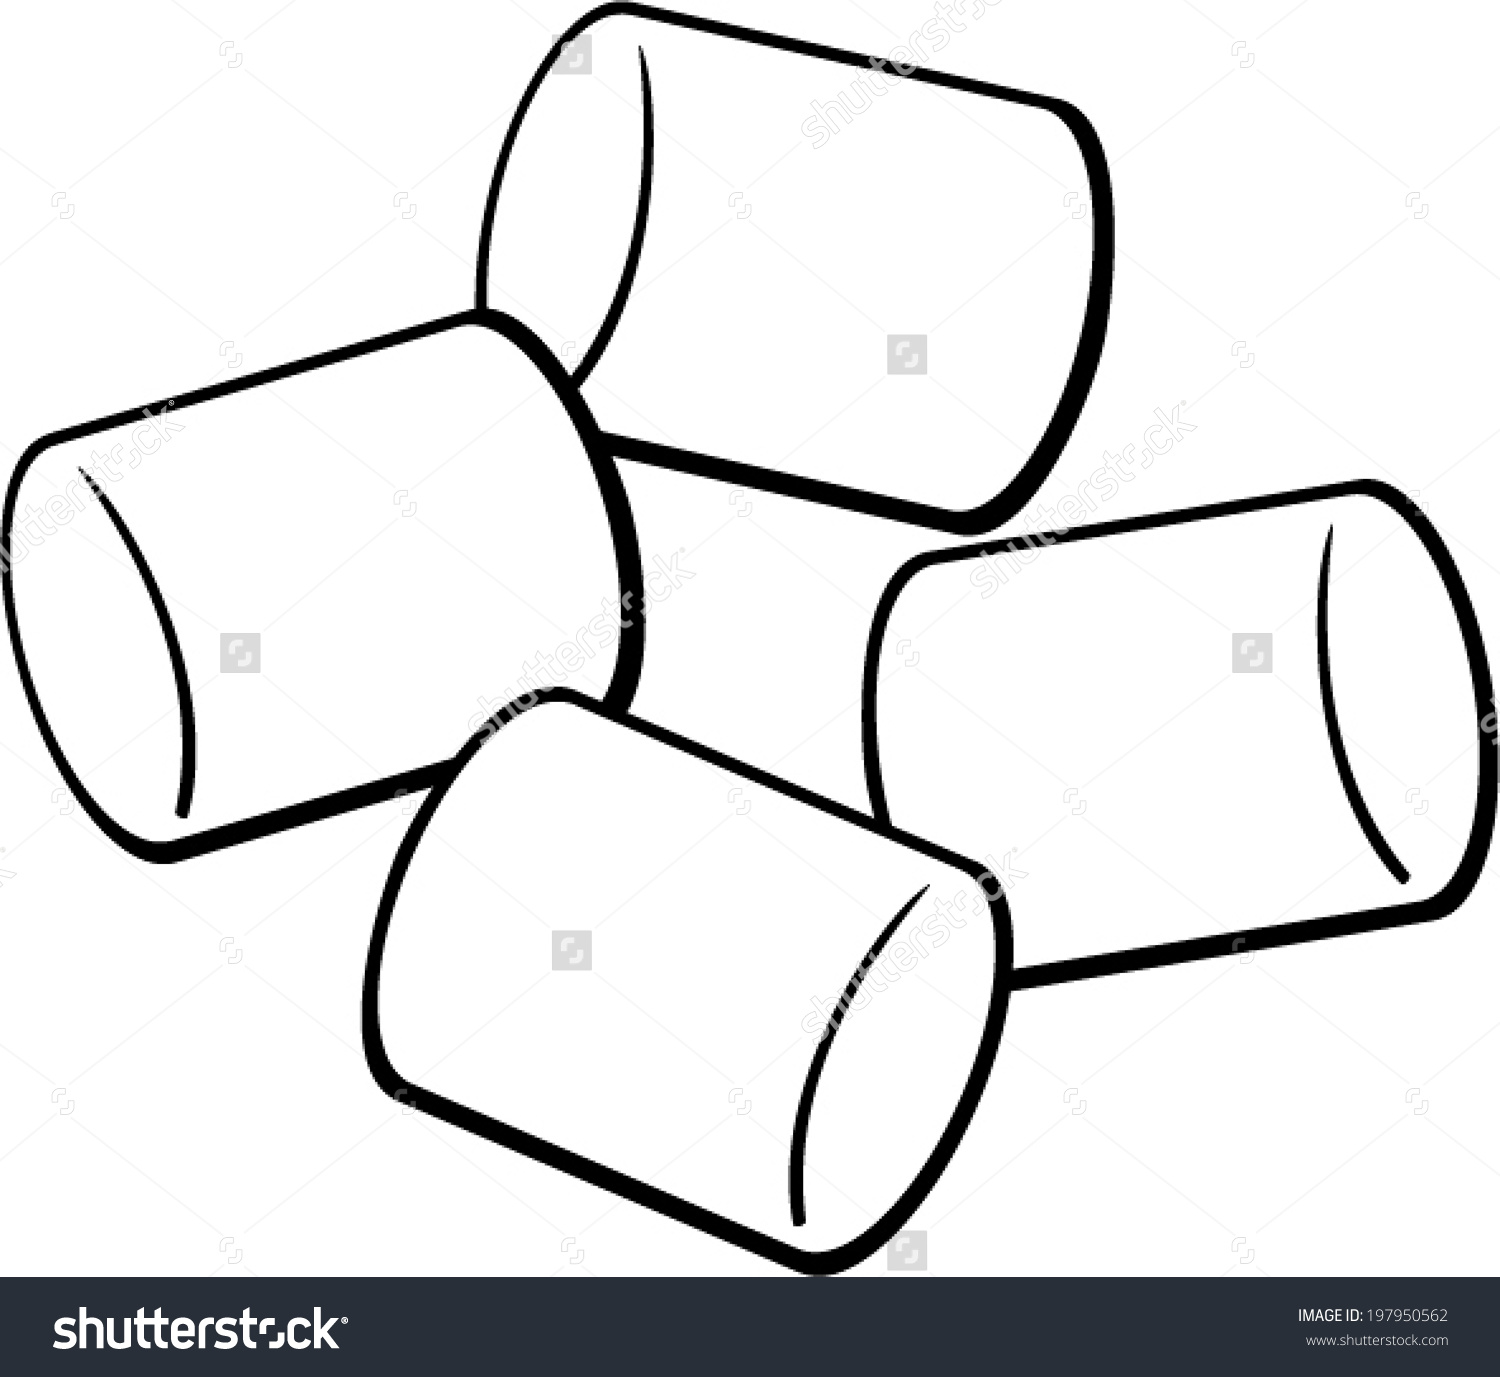 Marshmallow clipart vector Marshmallow vector Transparent FREE for